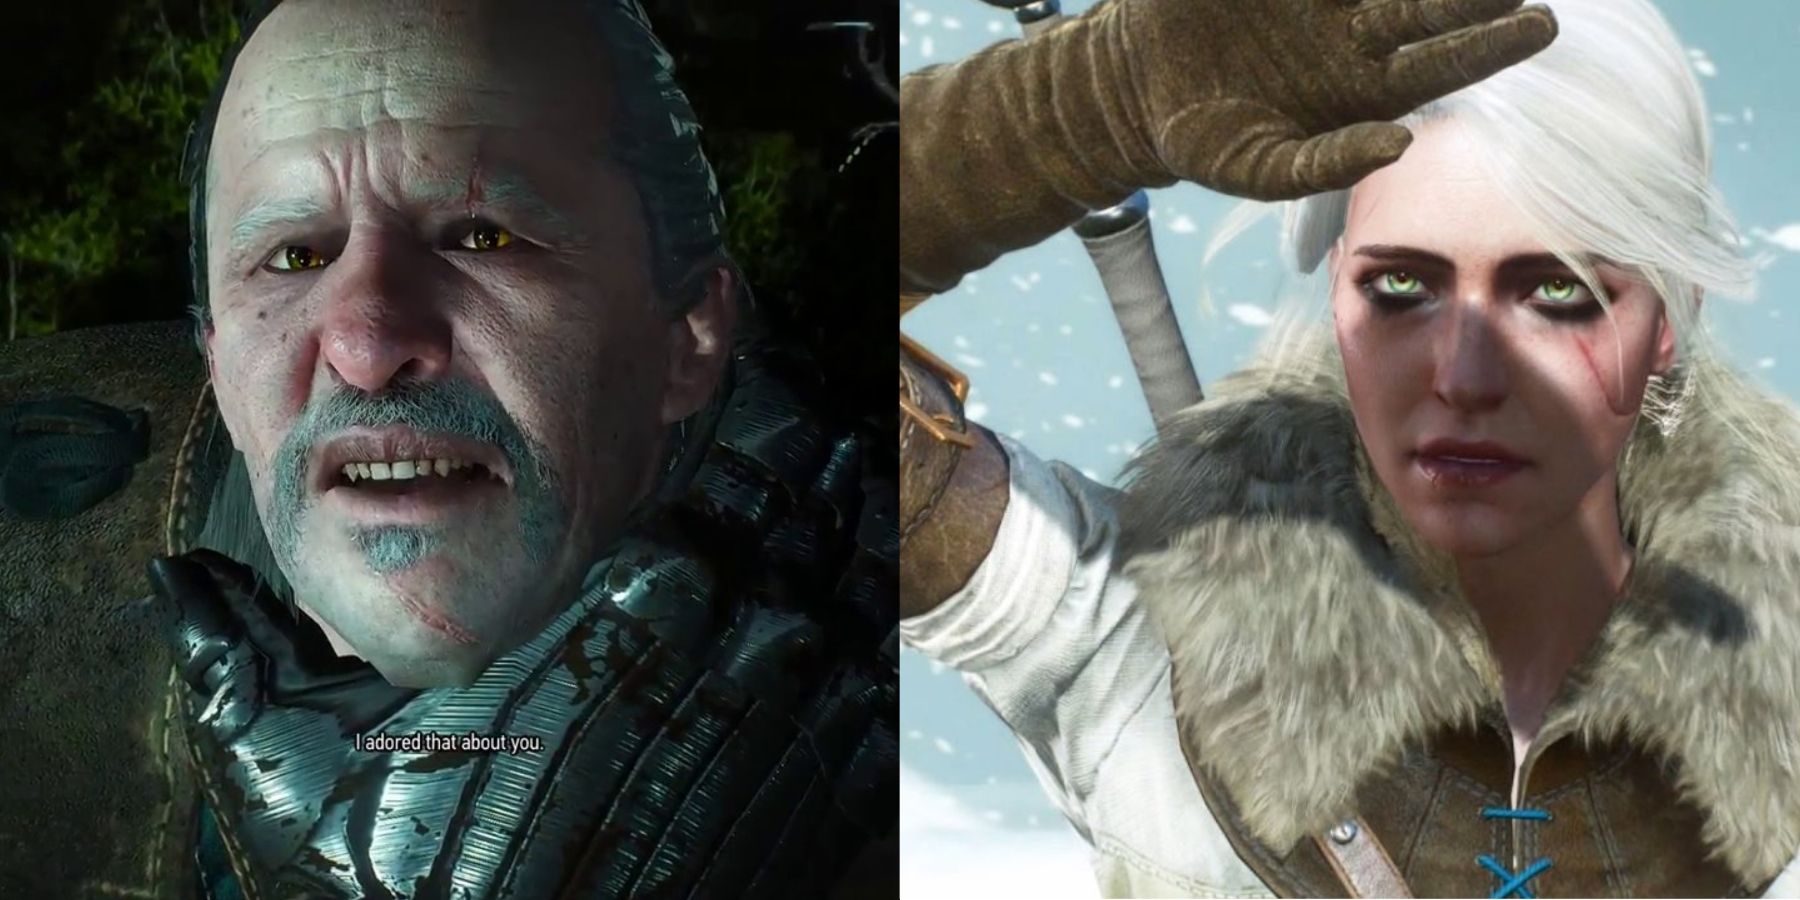 The Witcher Moments That Made Fans Cry feature